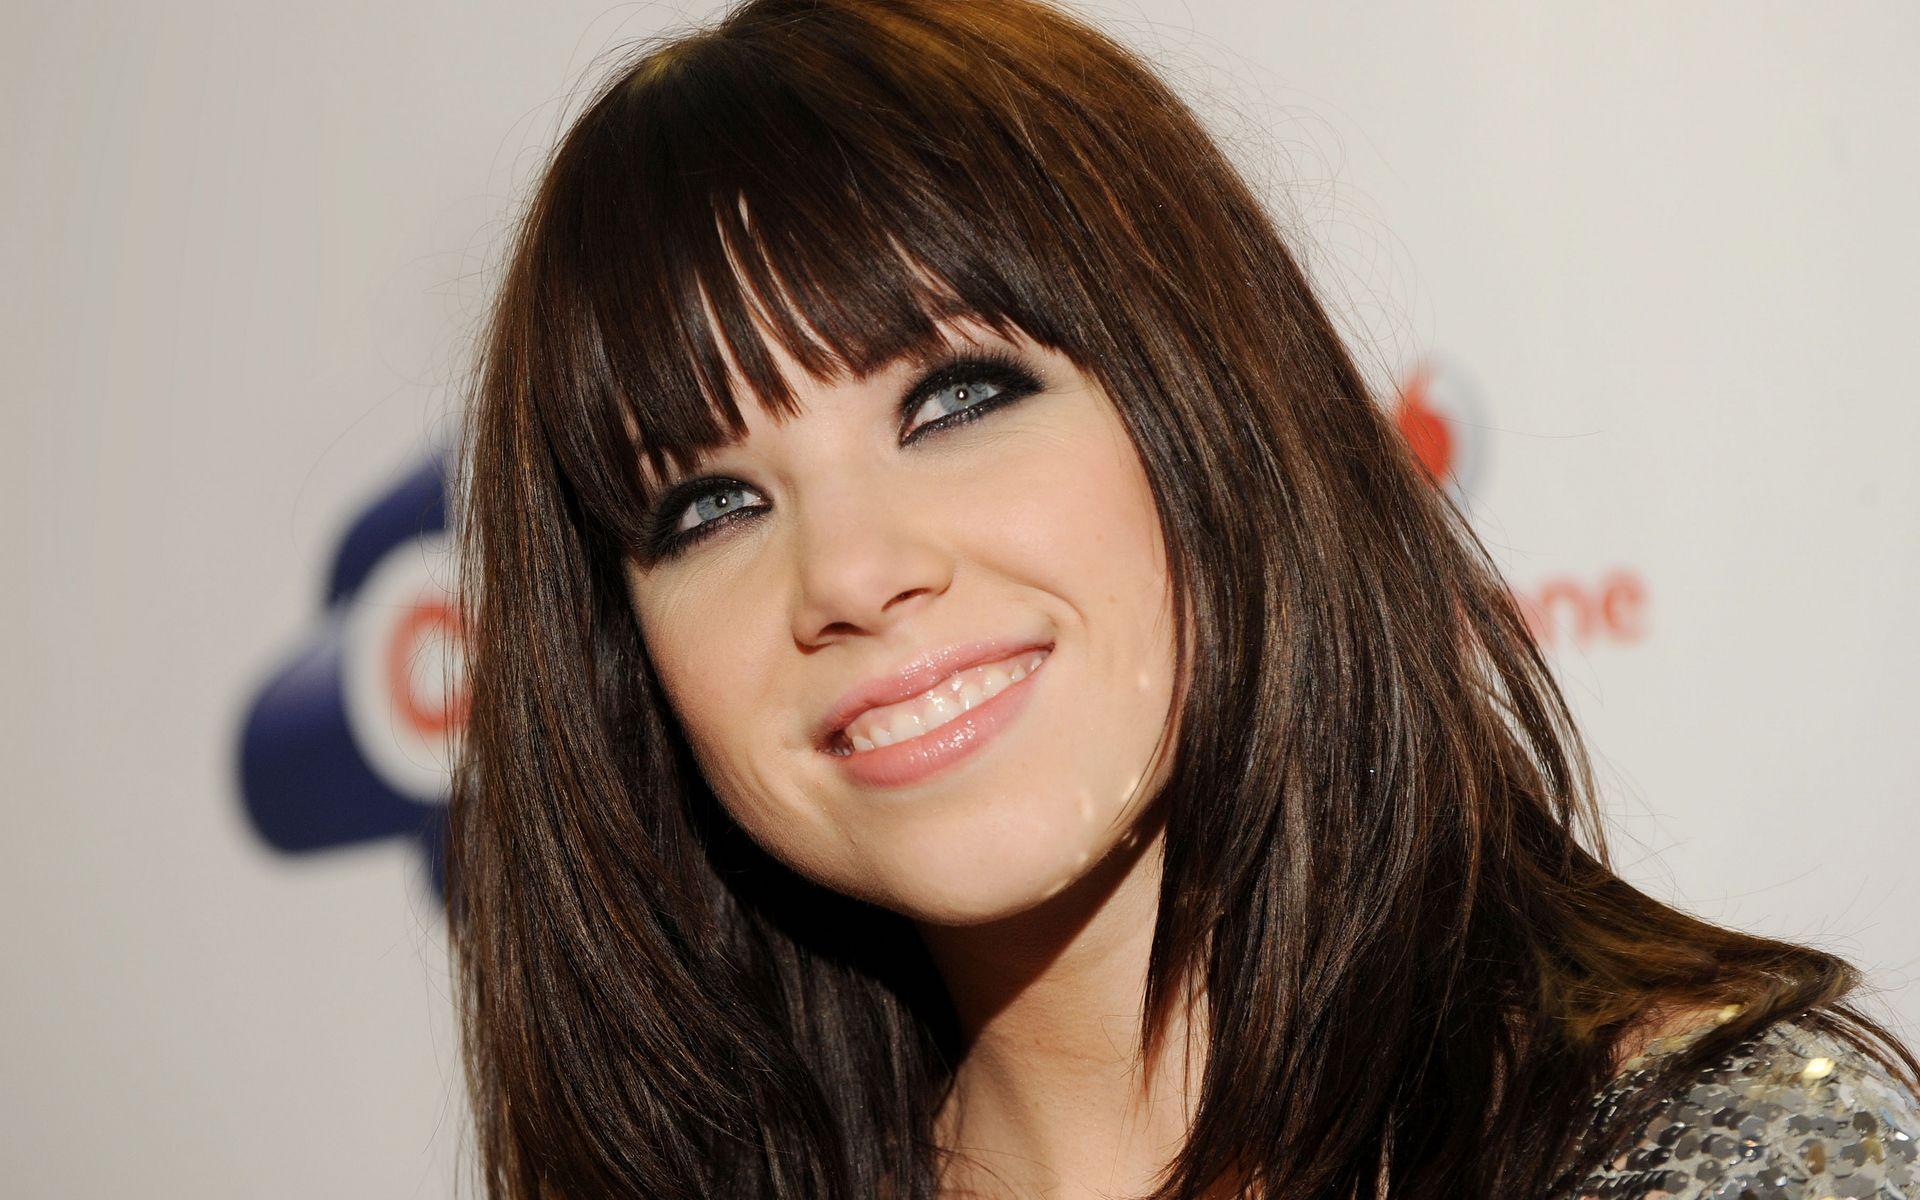 Carly Rae Jepsen Wallpapers Wallpaper Cave